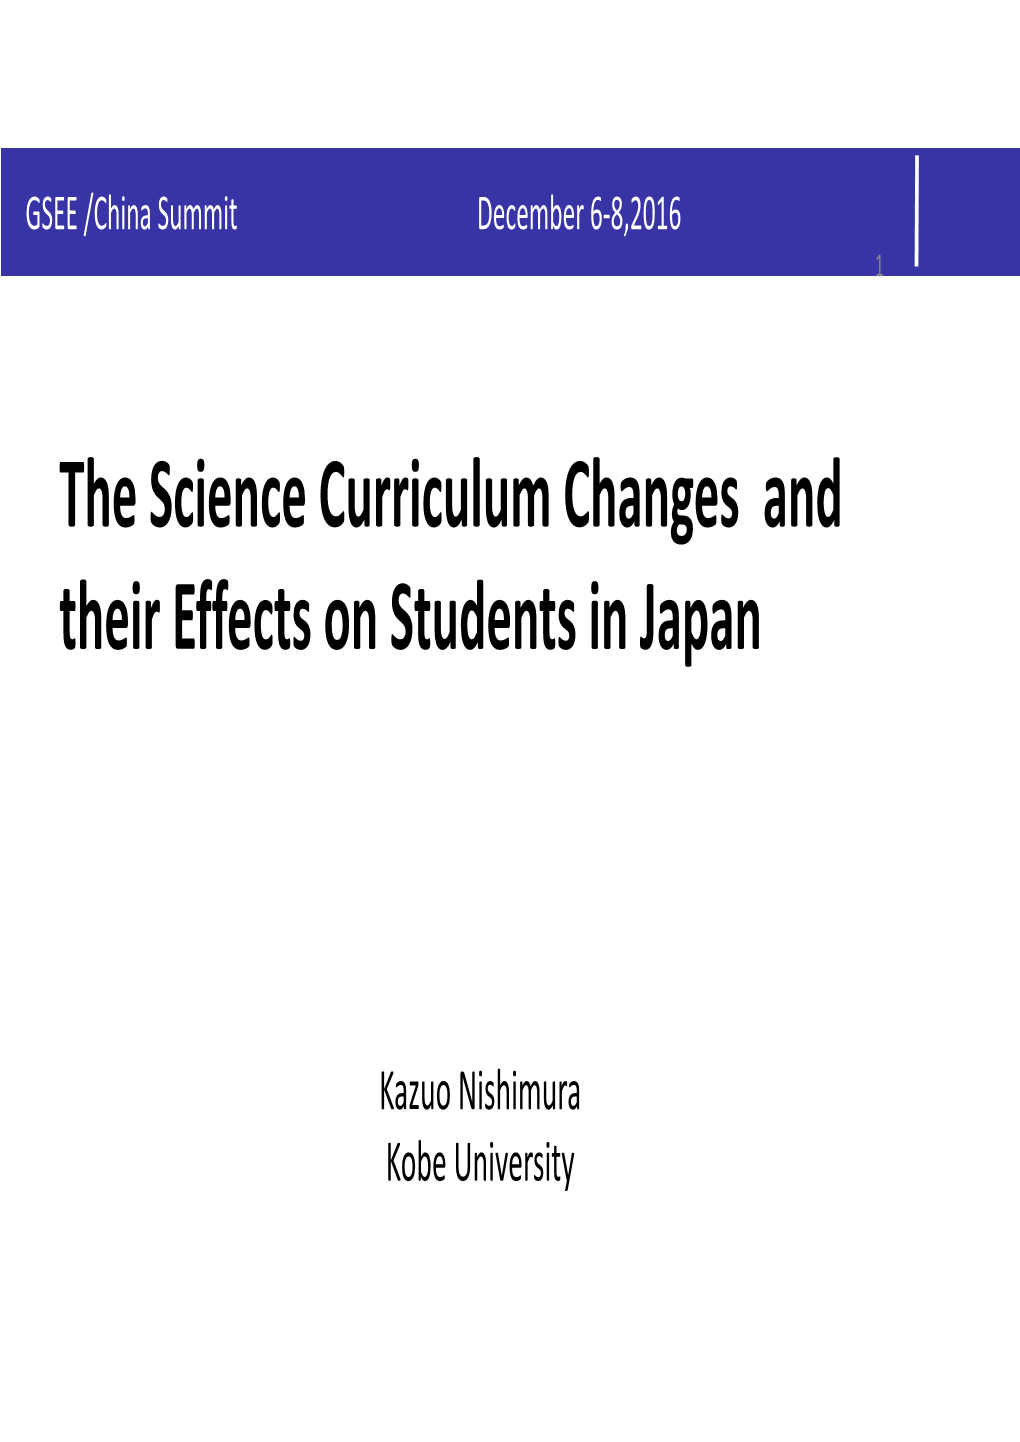 The Science Curriculum Changes and Its Effects on Students in Japan